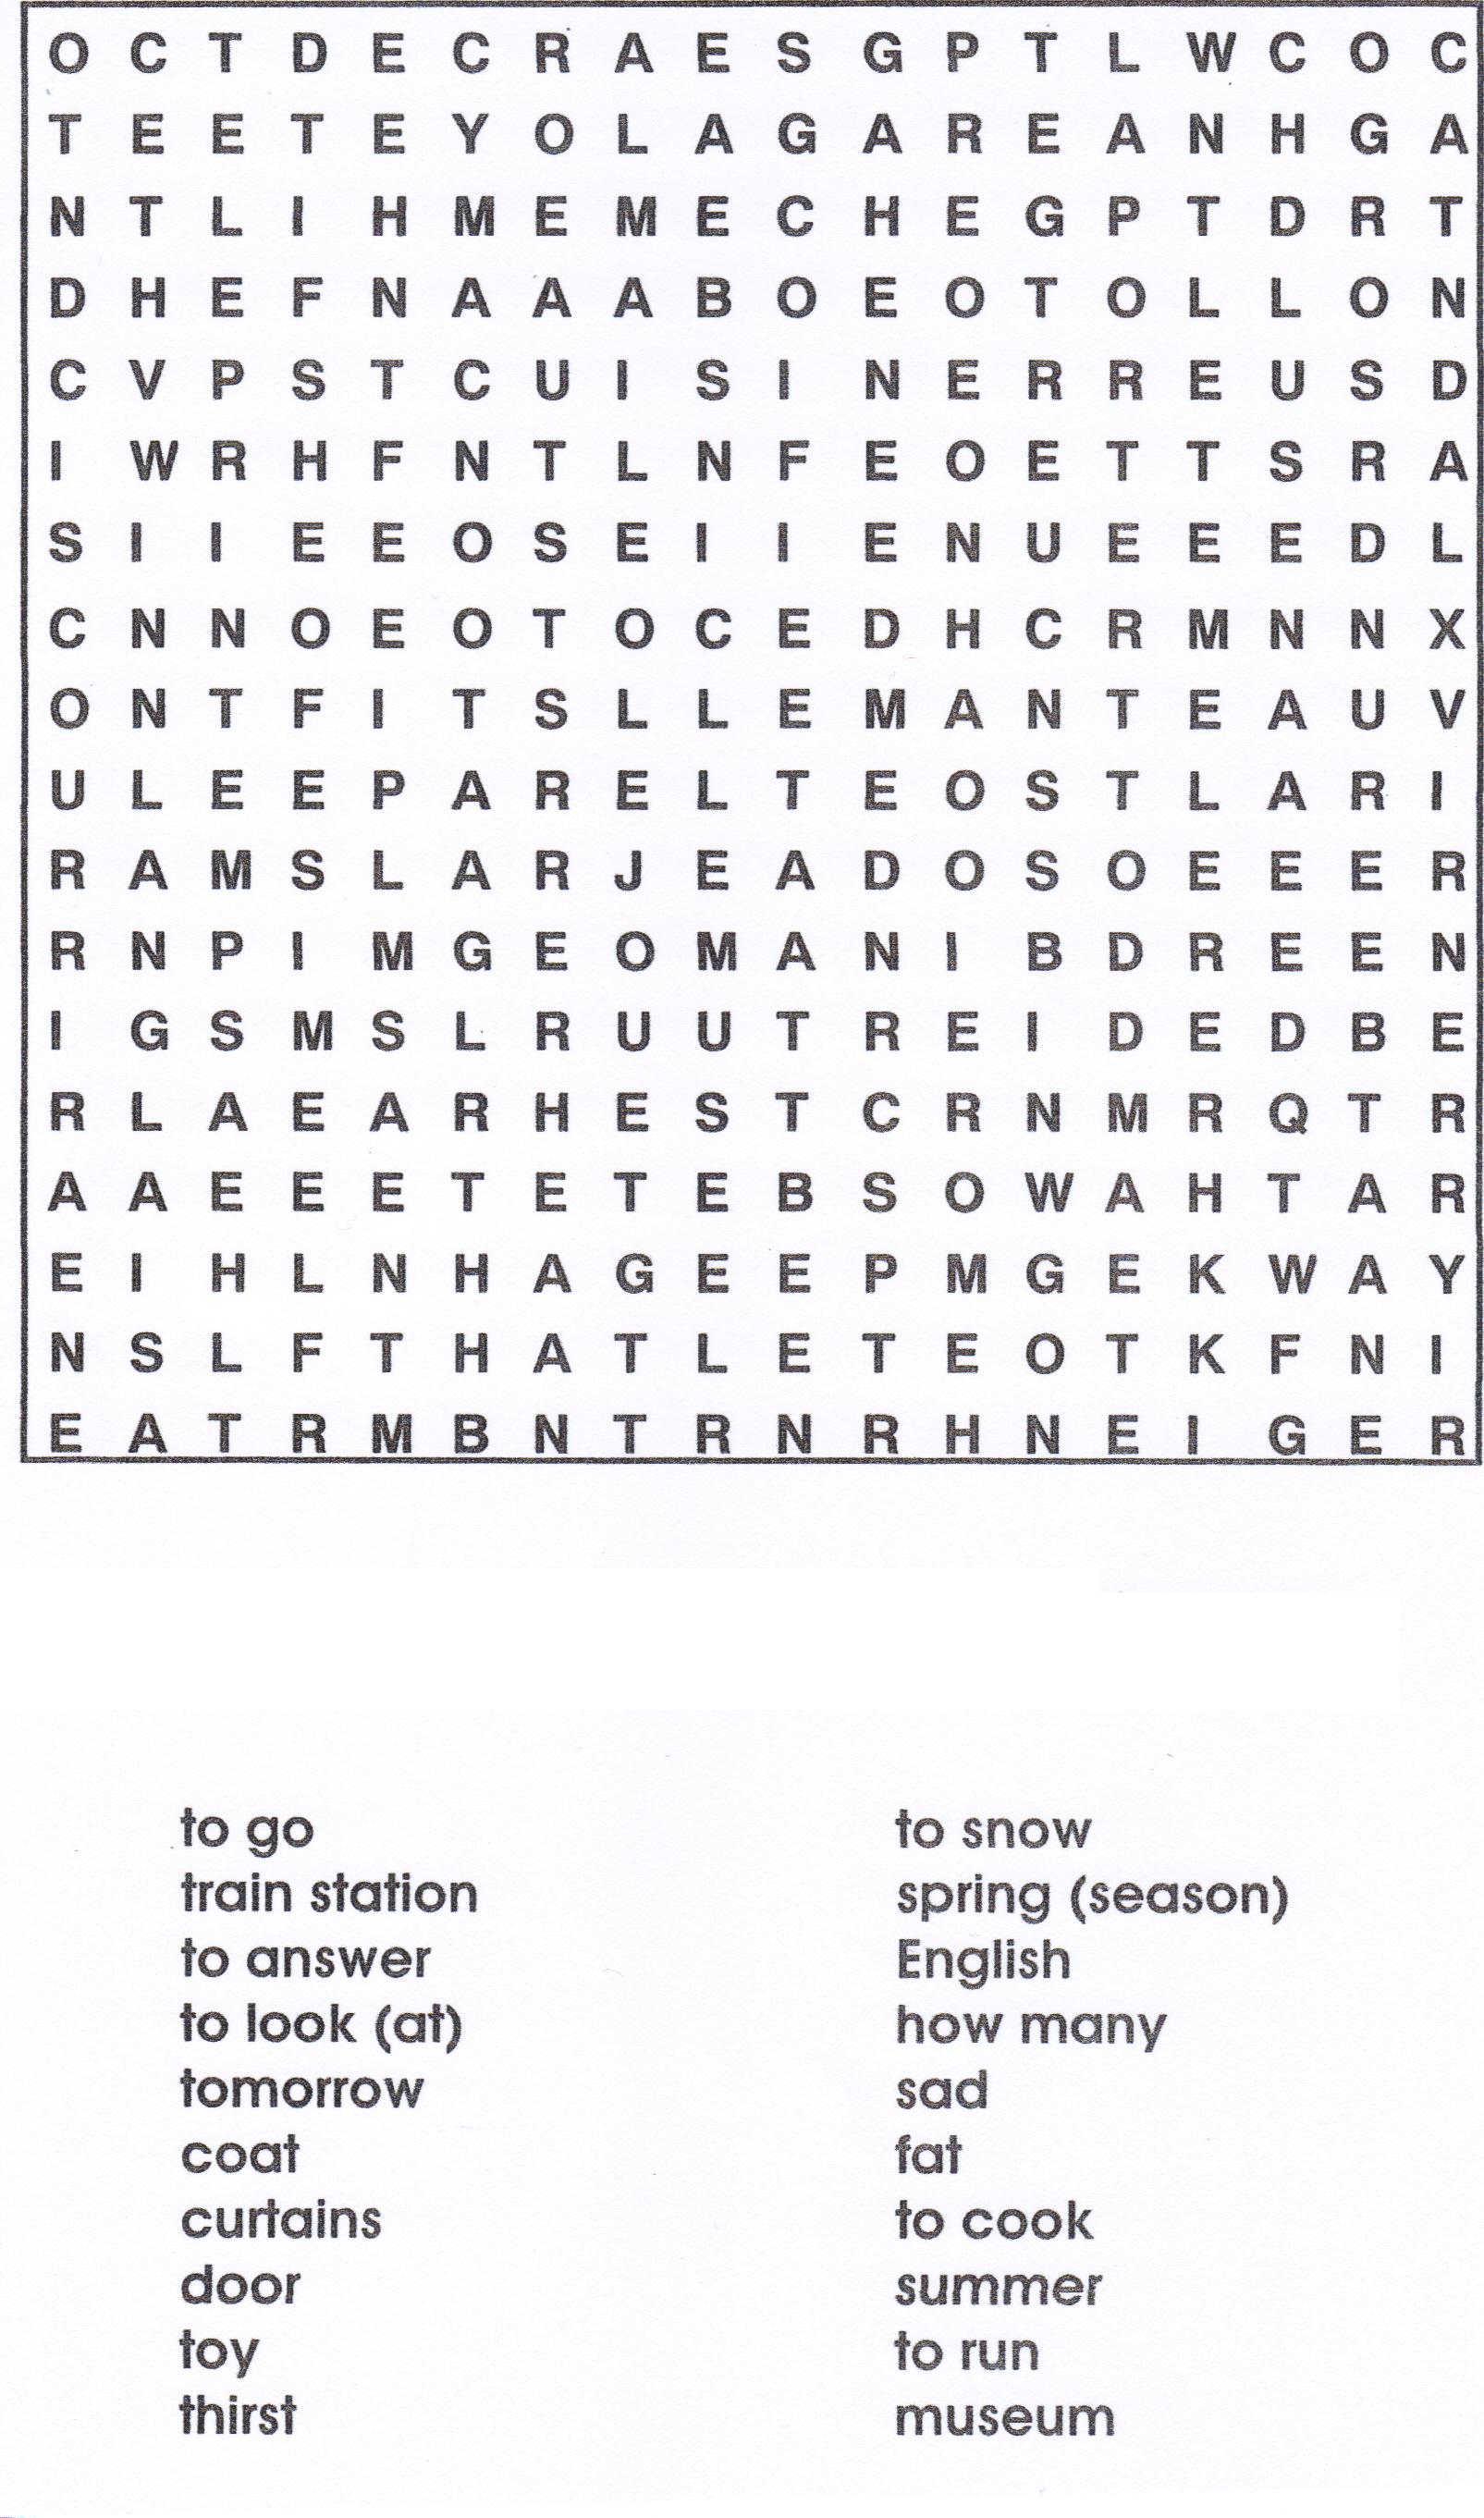 How to Finish a Crossword Puzzle: 6 Steps (with Pictures)